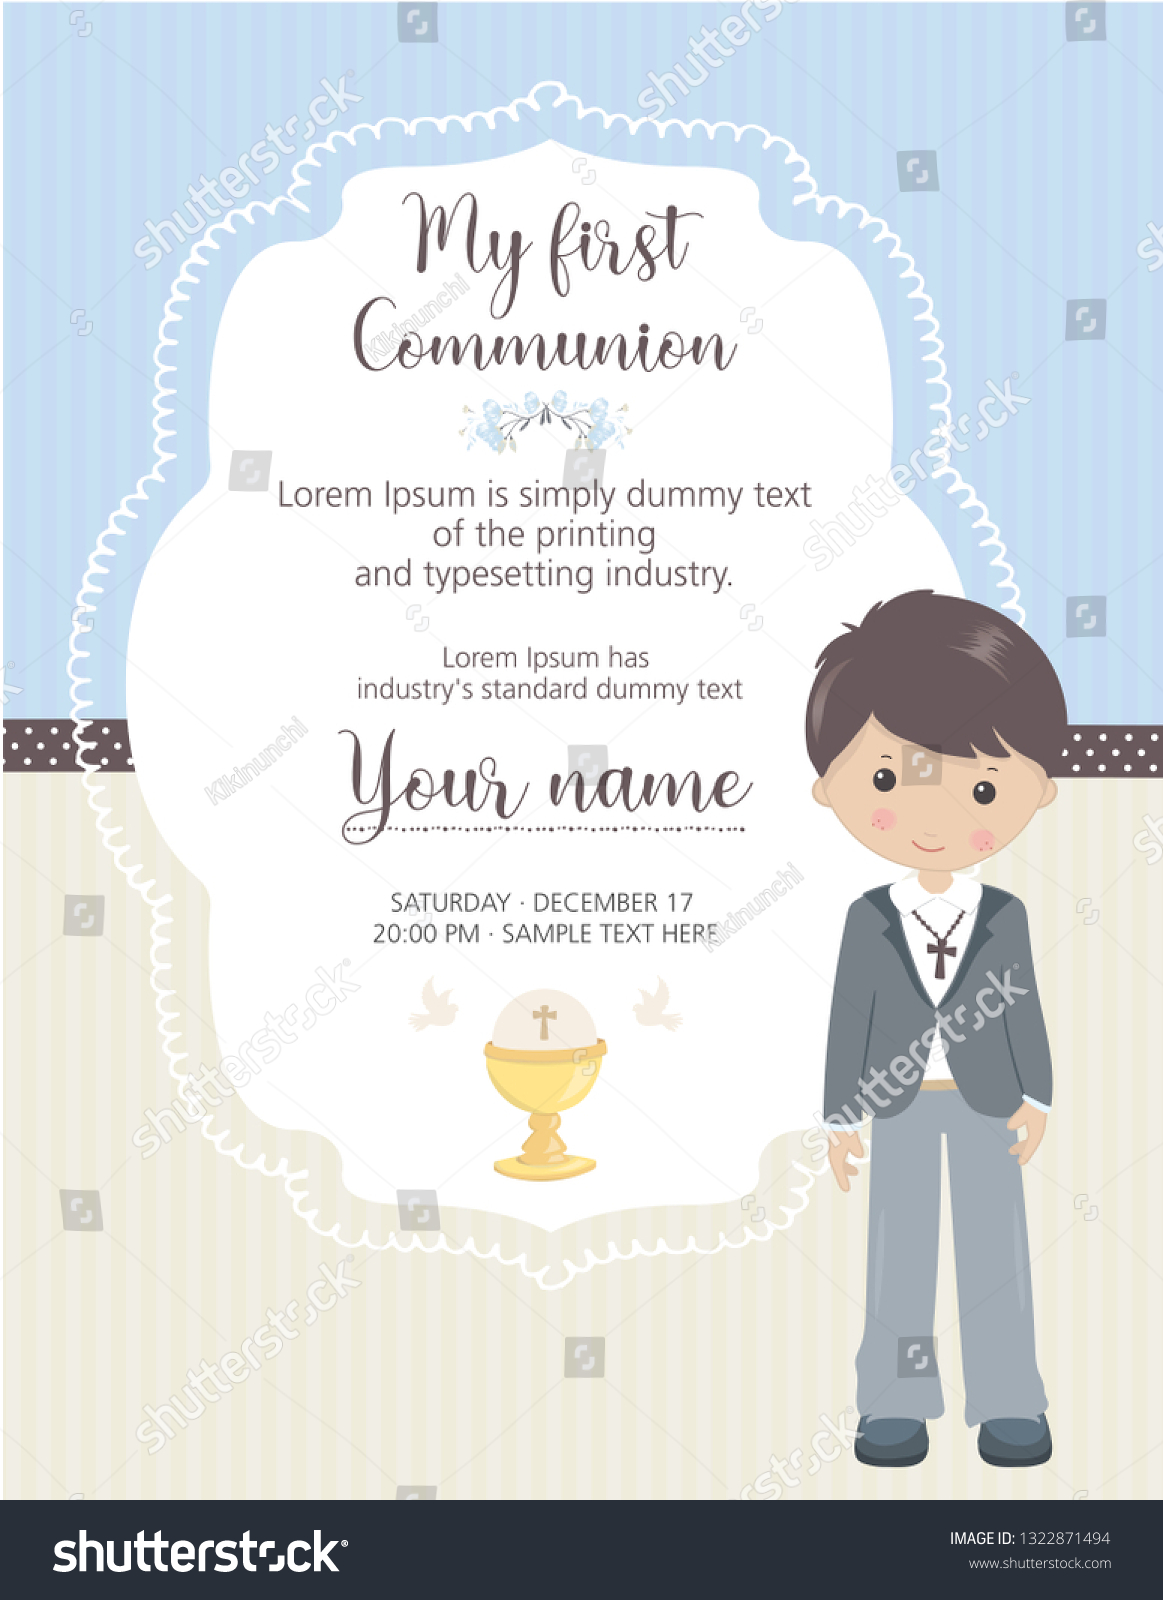 SVG of My first communion invitation vertical. Boy invitation with cute frame svg